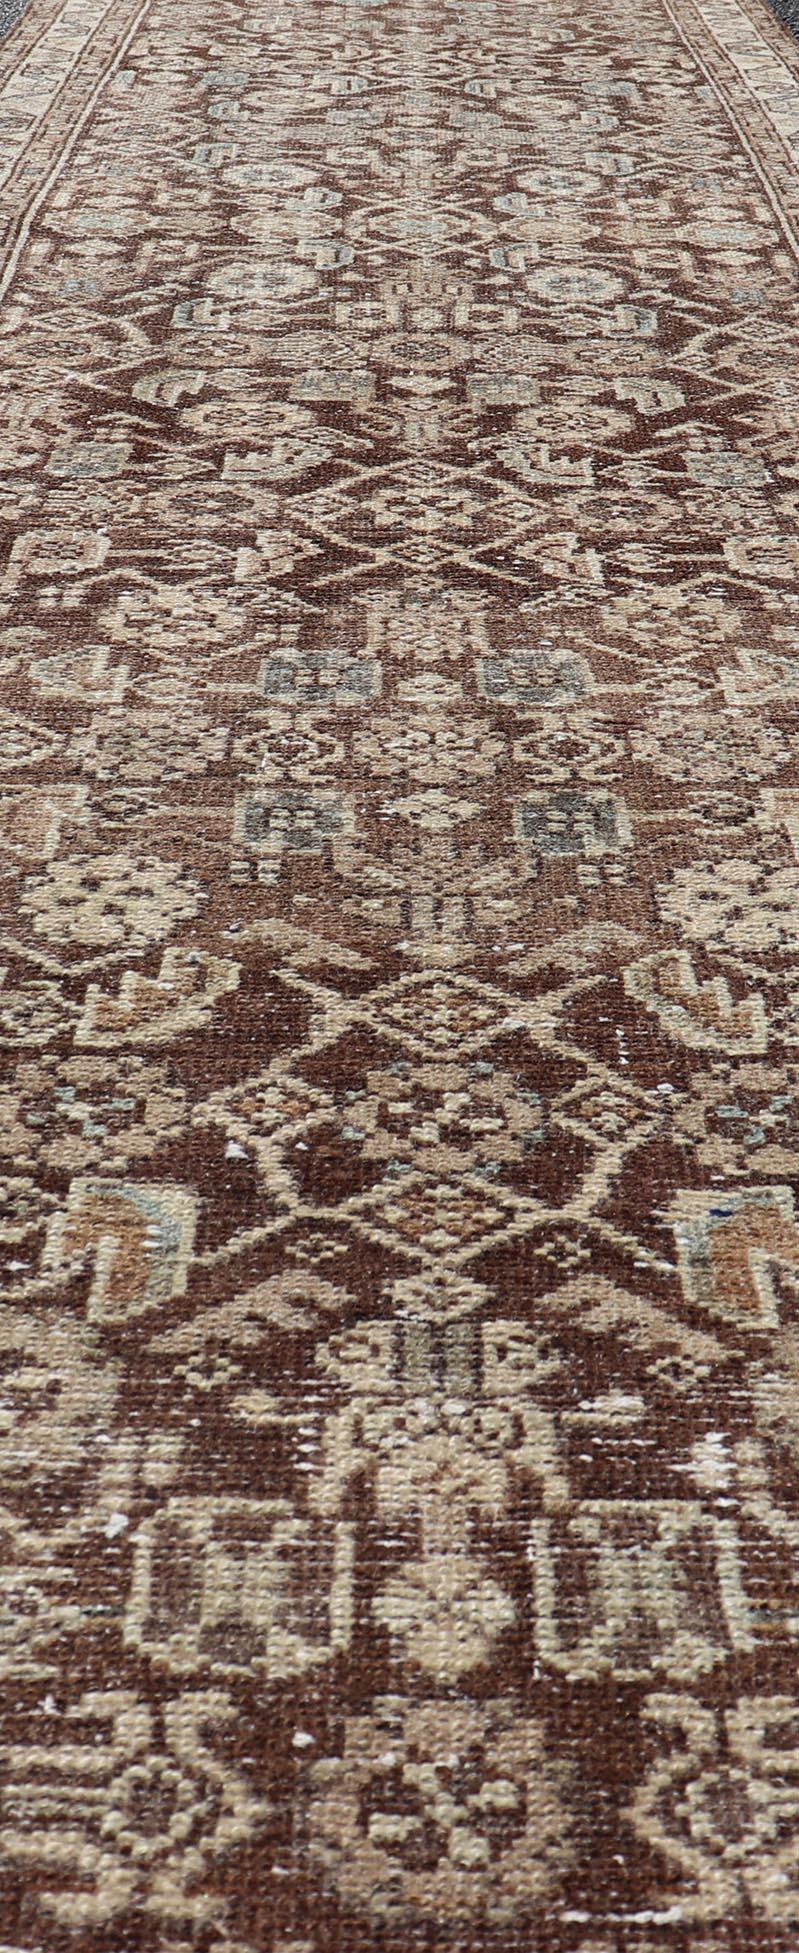 Antique Persian Hamadan Runner in Warm Tones of Grey, Brown, and L. Brown For Sale 1